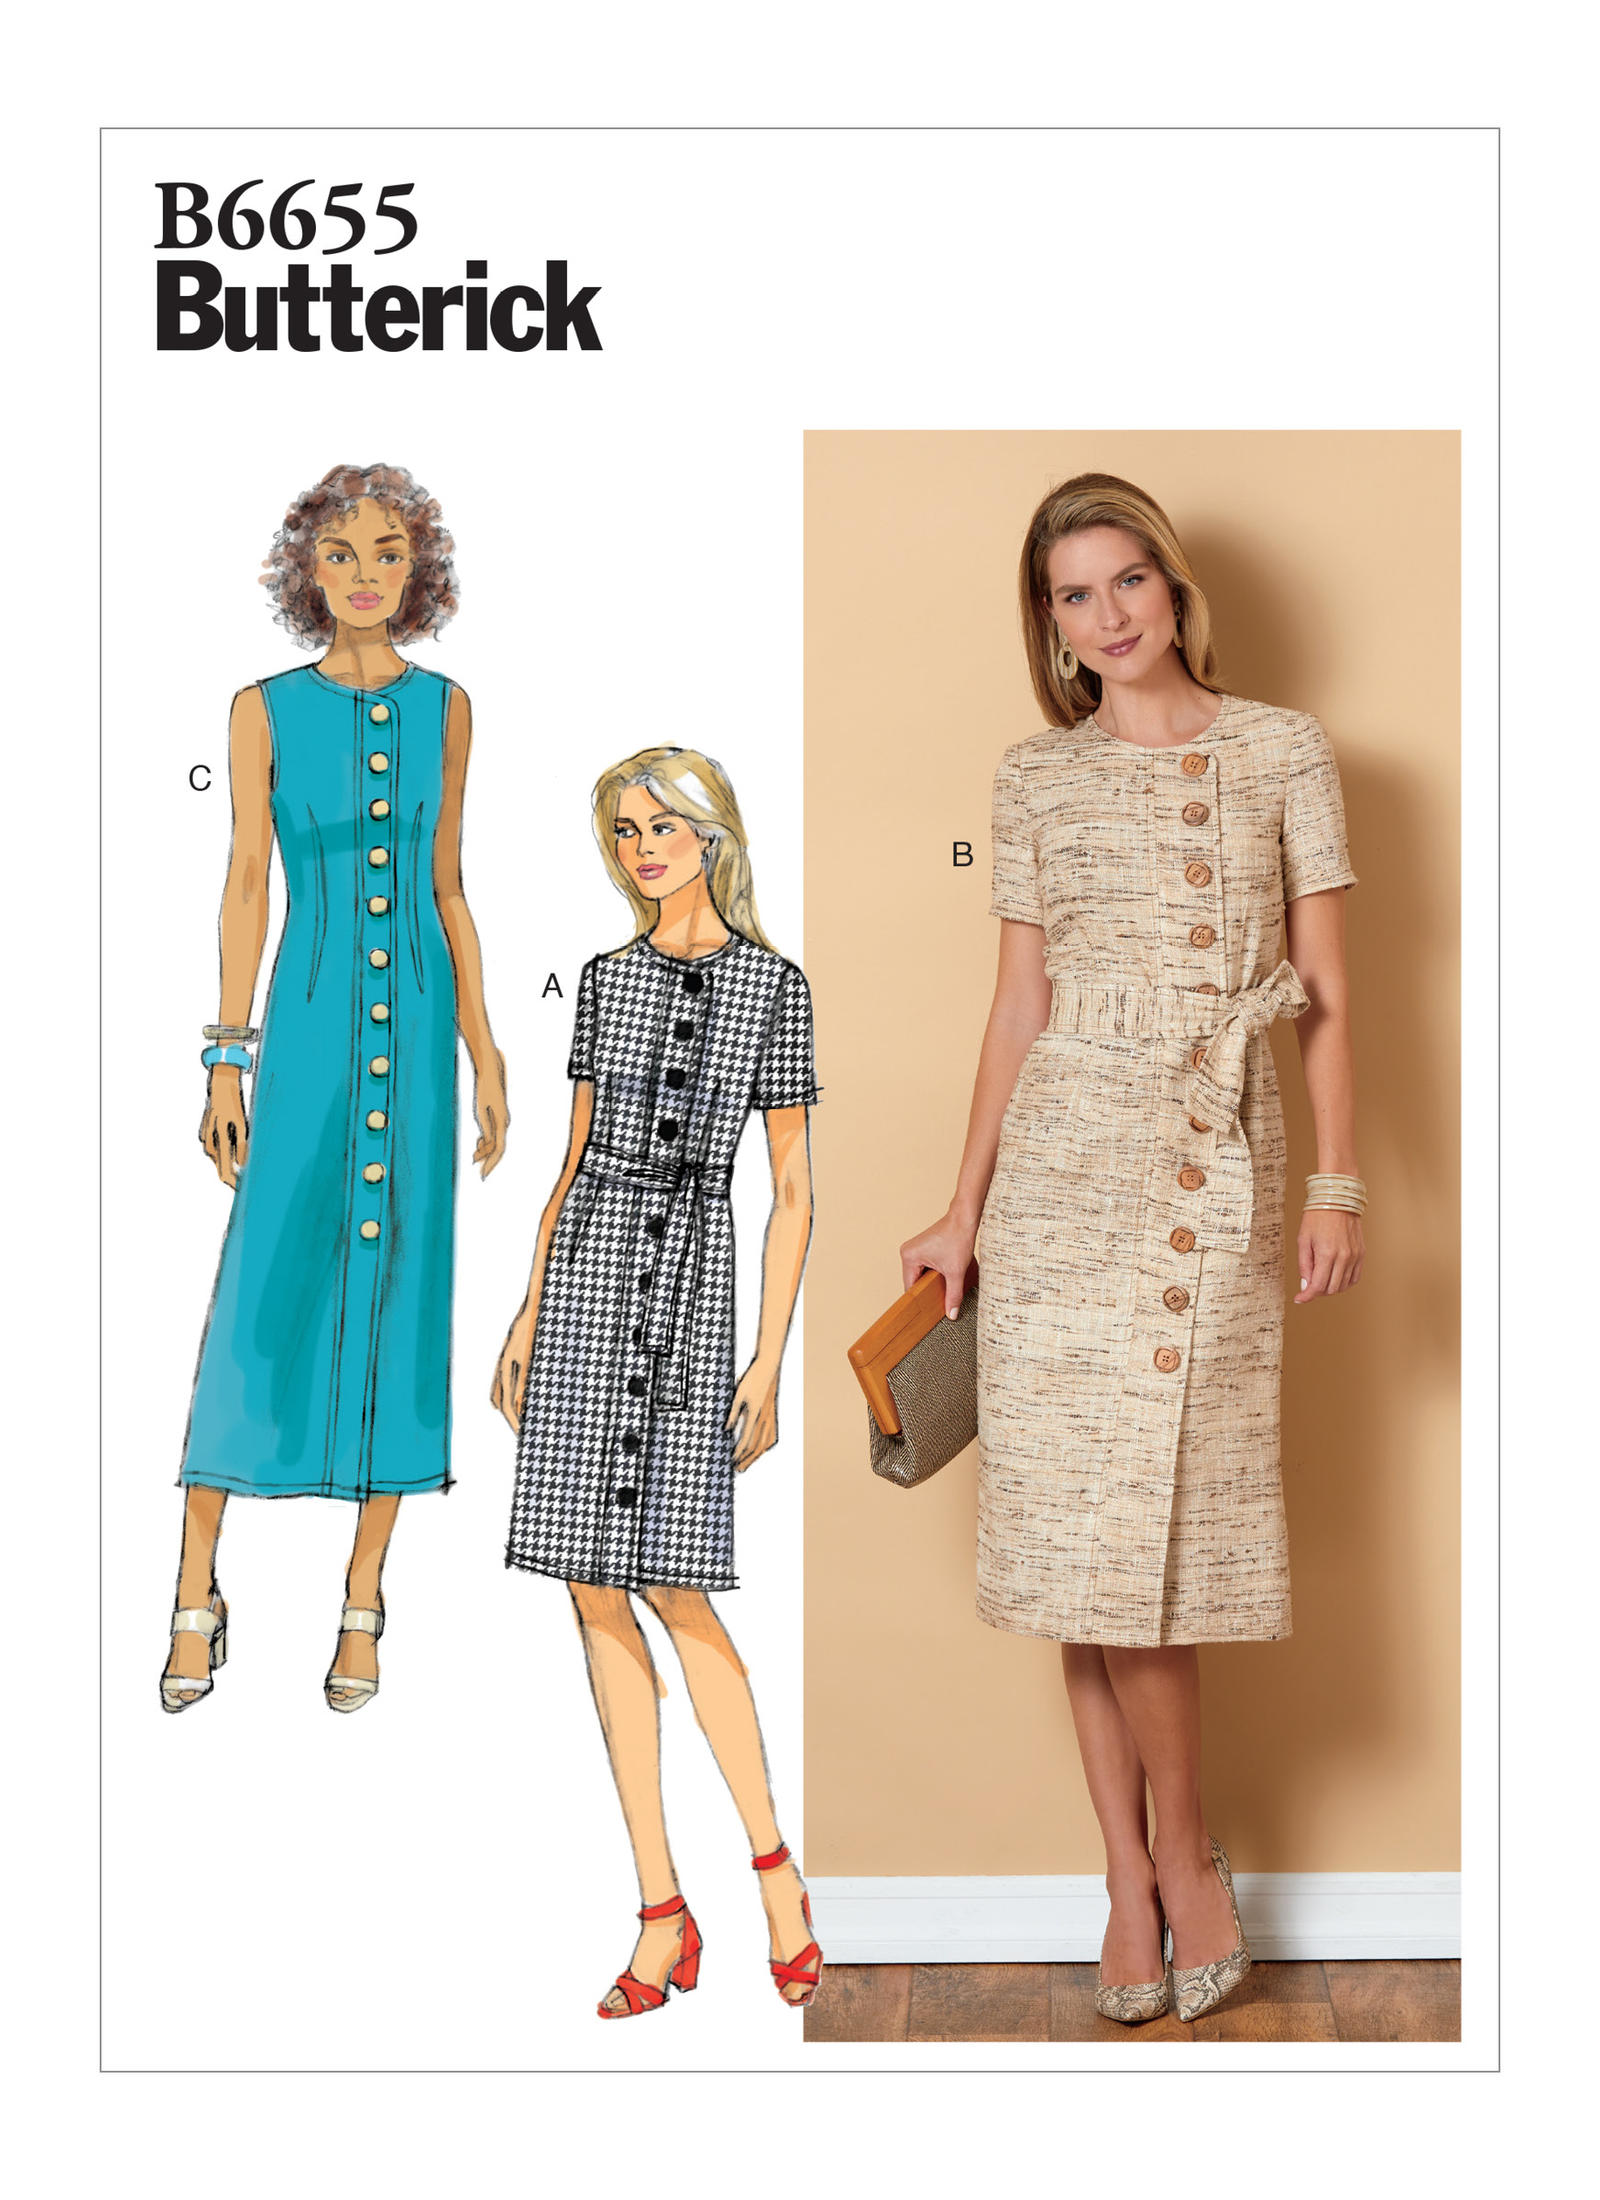 https://images.patternreview.com/sewing/patterns/butterick/2019/6655/6655.jpg